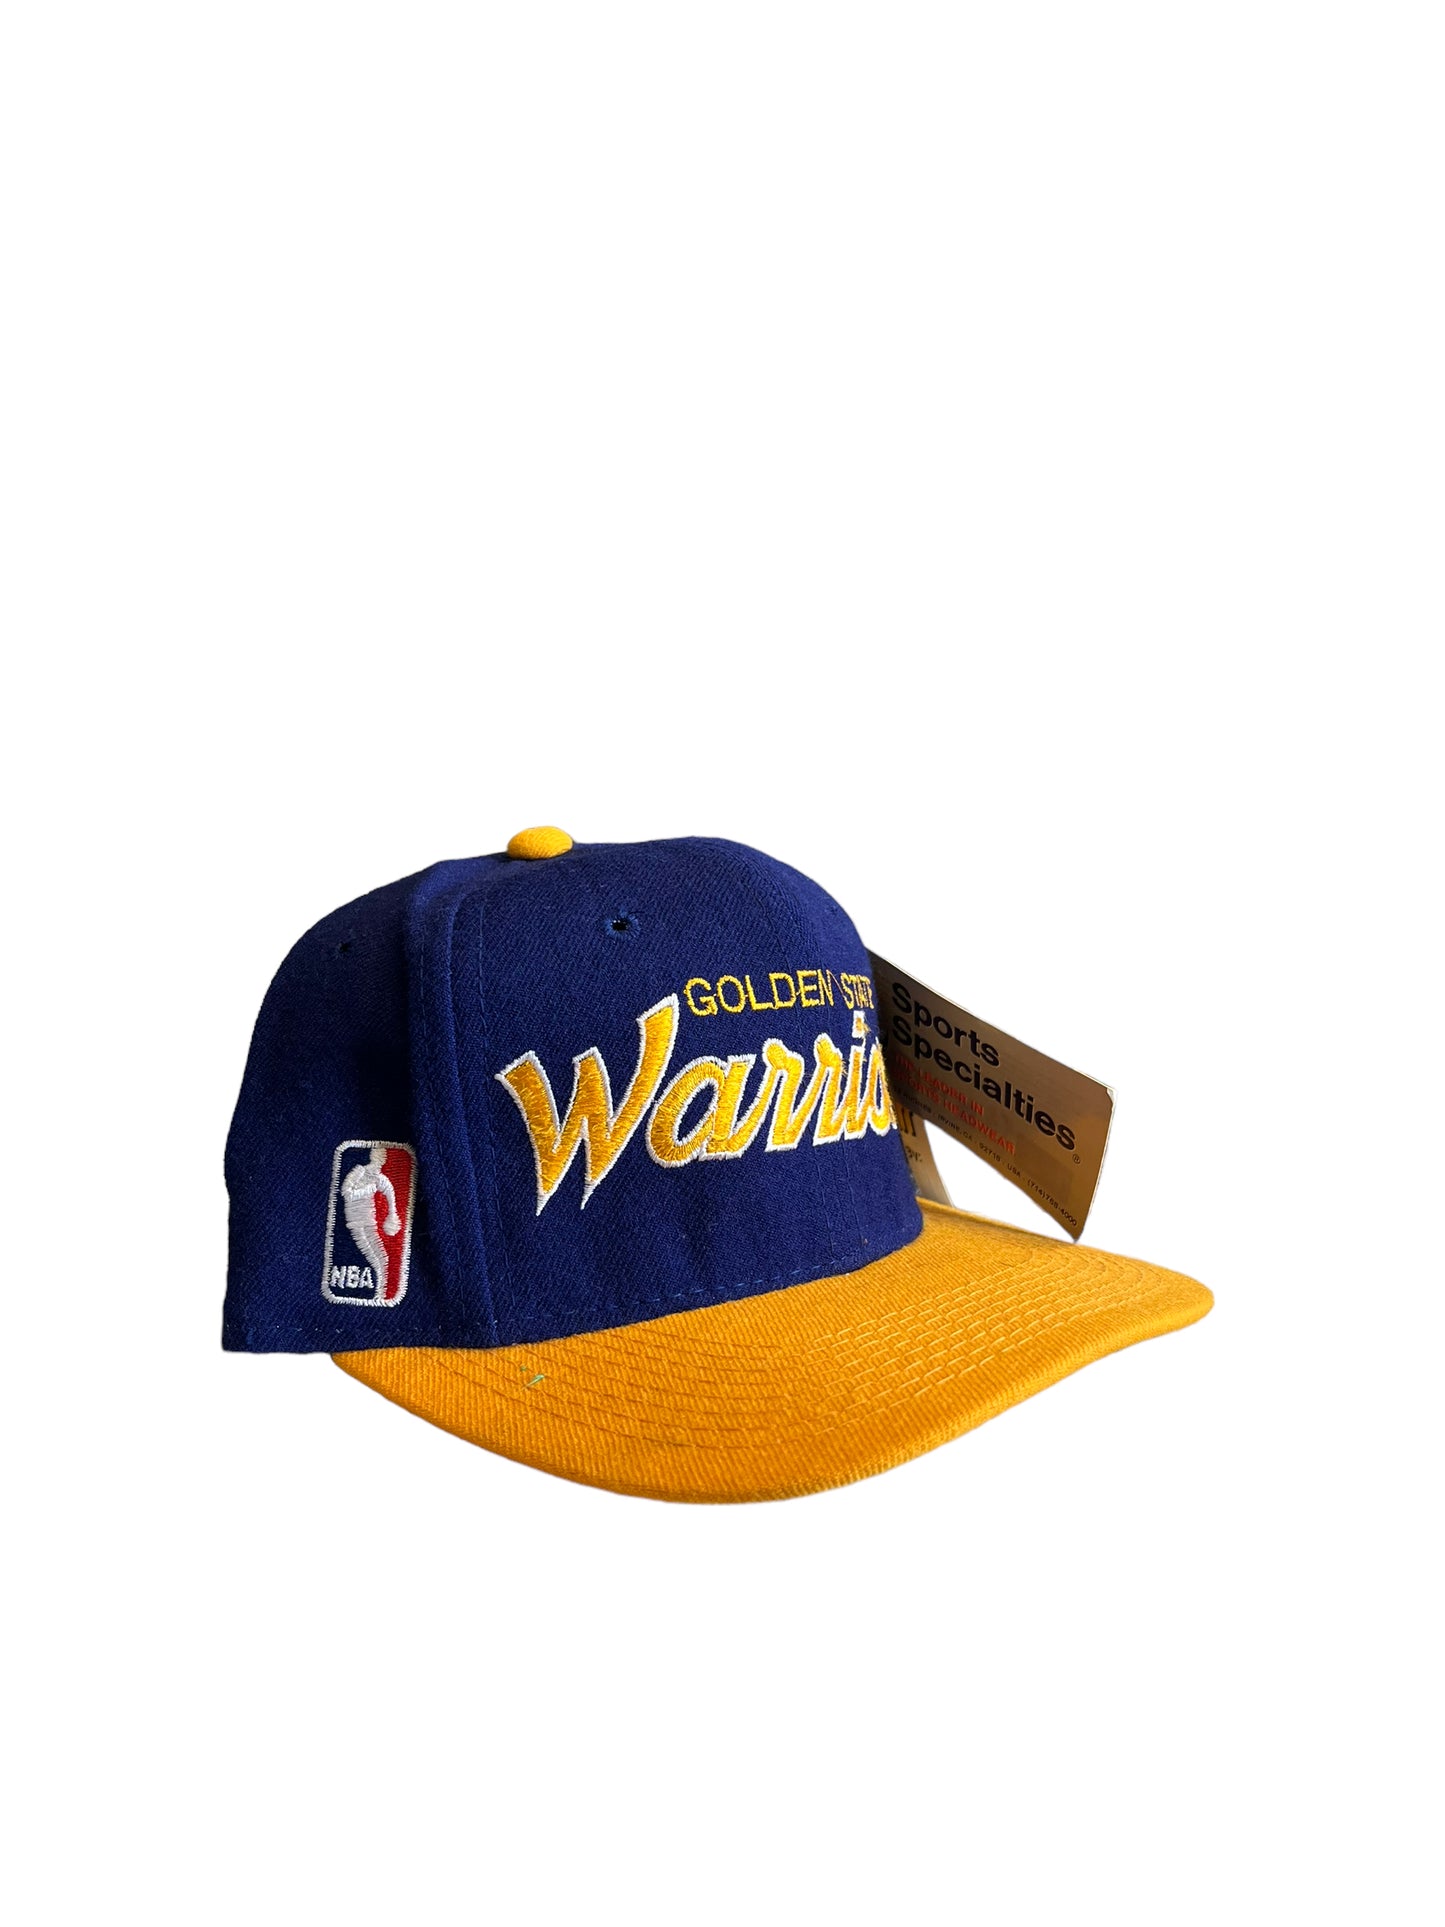 Vintage Golden State Warriors Fitted Hat 6 7/8 Brand New